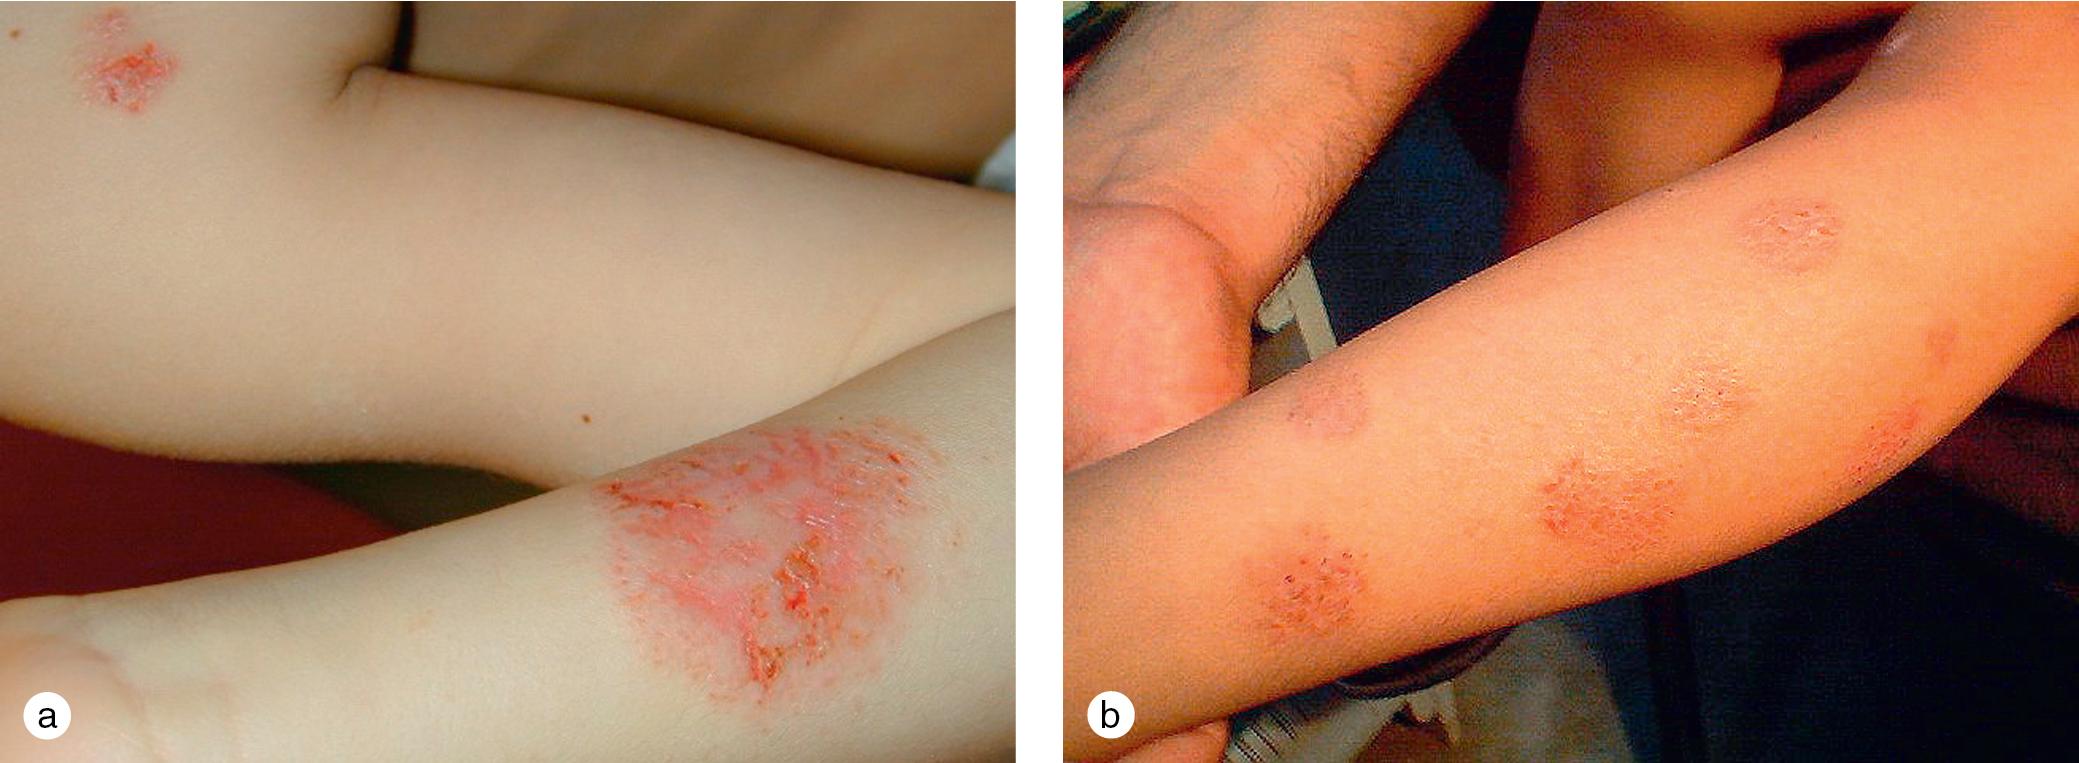 Fig. 3.22, Nummular eczema. (a) An adolescent demonstrated the acute exudative round patches of nummular eczema. (b) The term nummular eczema is also used to describe the chronic circular patches on the extremities and trunks of atopic patients, exemplified by the patches on another adolescent.